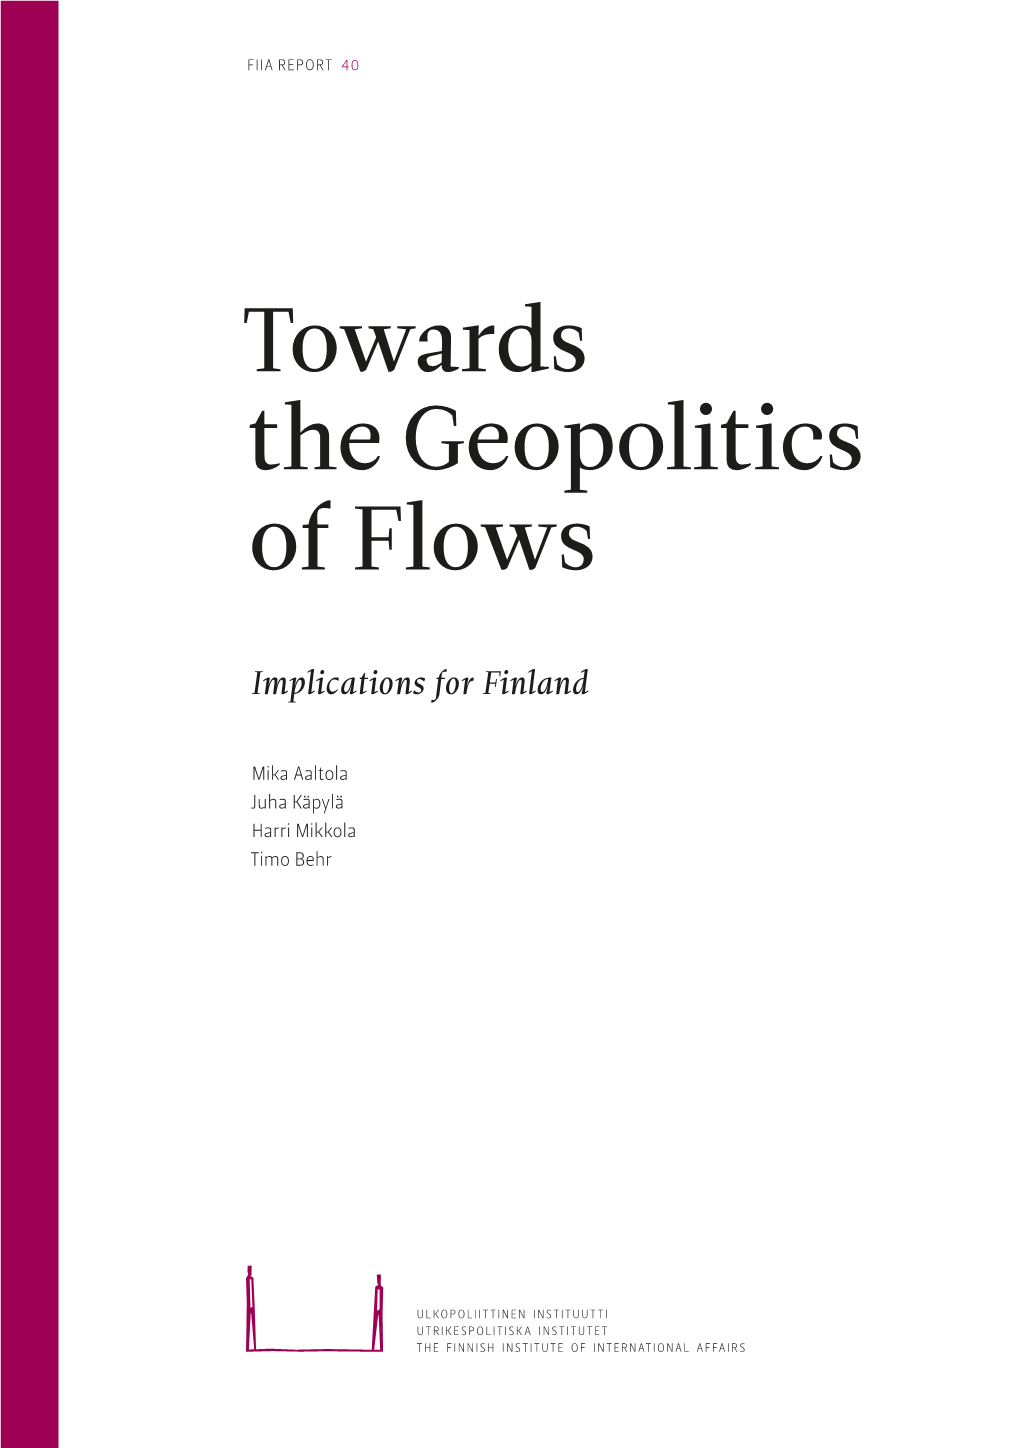 Towards the Geopolitics of Flows